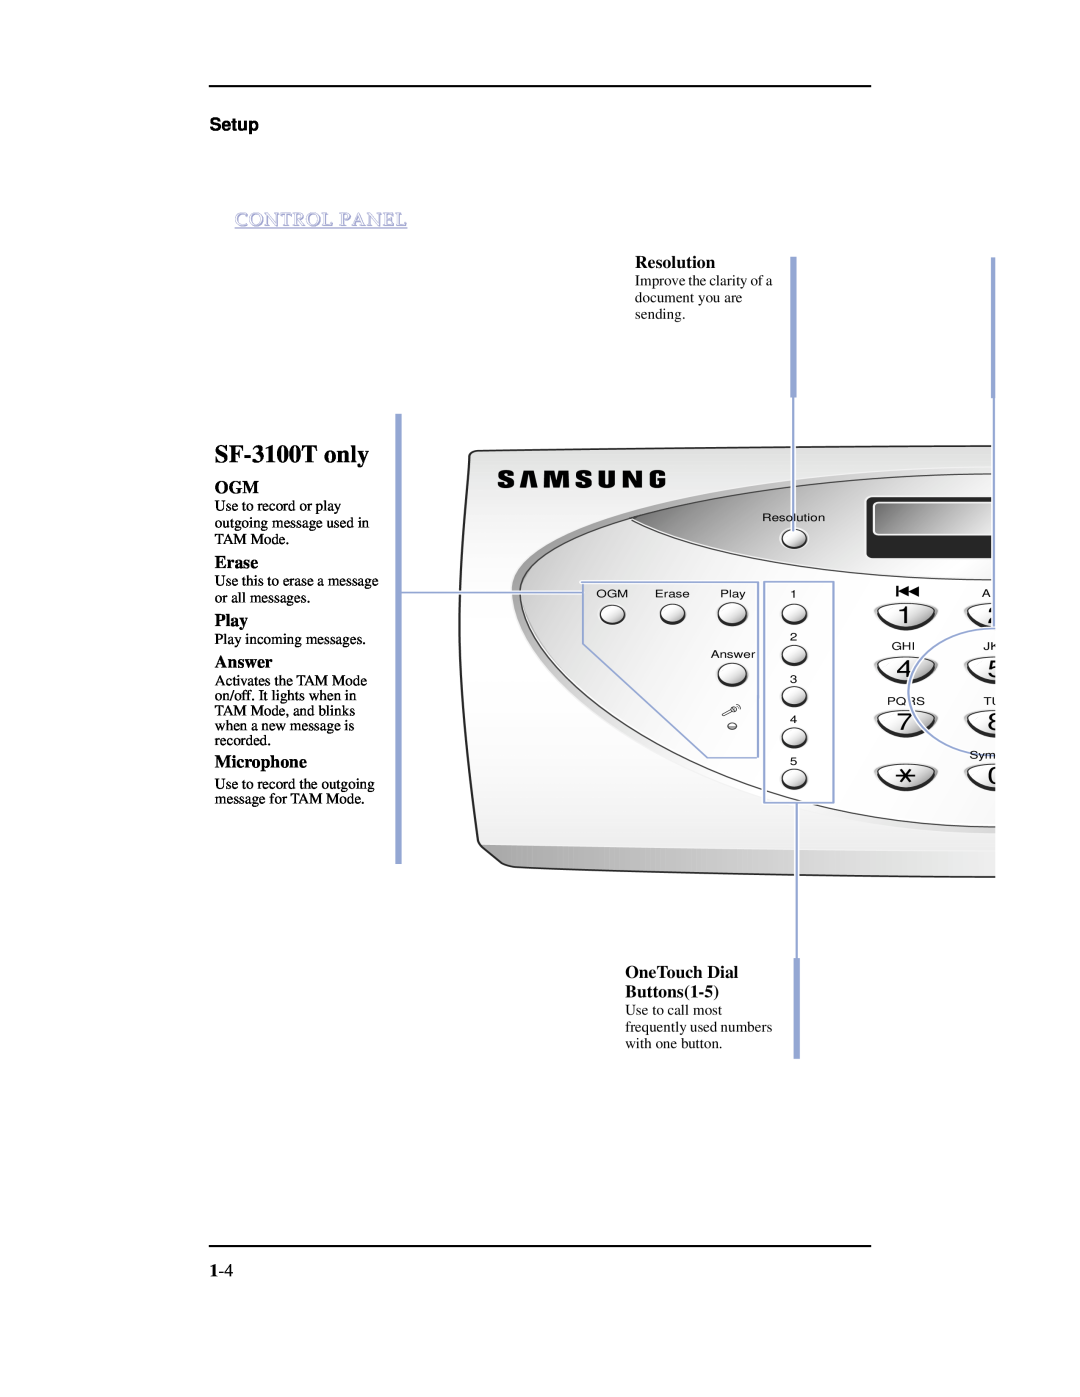 Samsung Control Panel, Erase, Play, Answer, Microphone, Resolution, OneTouch Dial Buttons1-5, SF-3100T only, Setup 